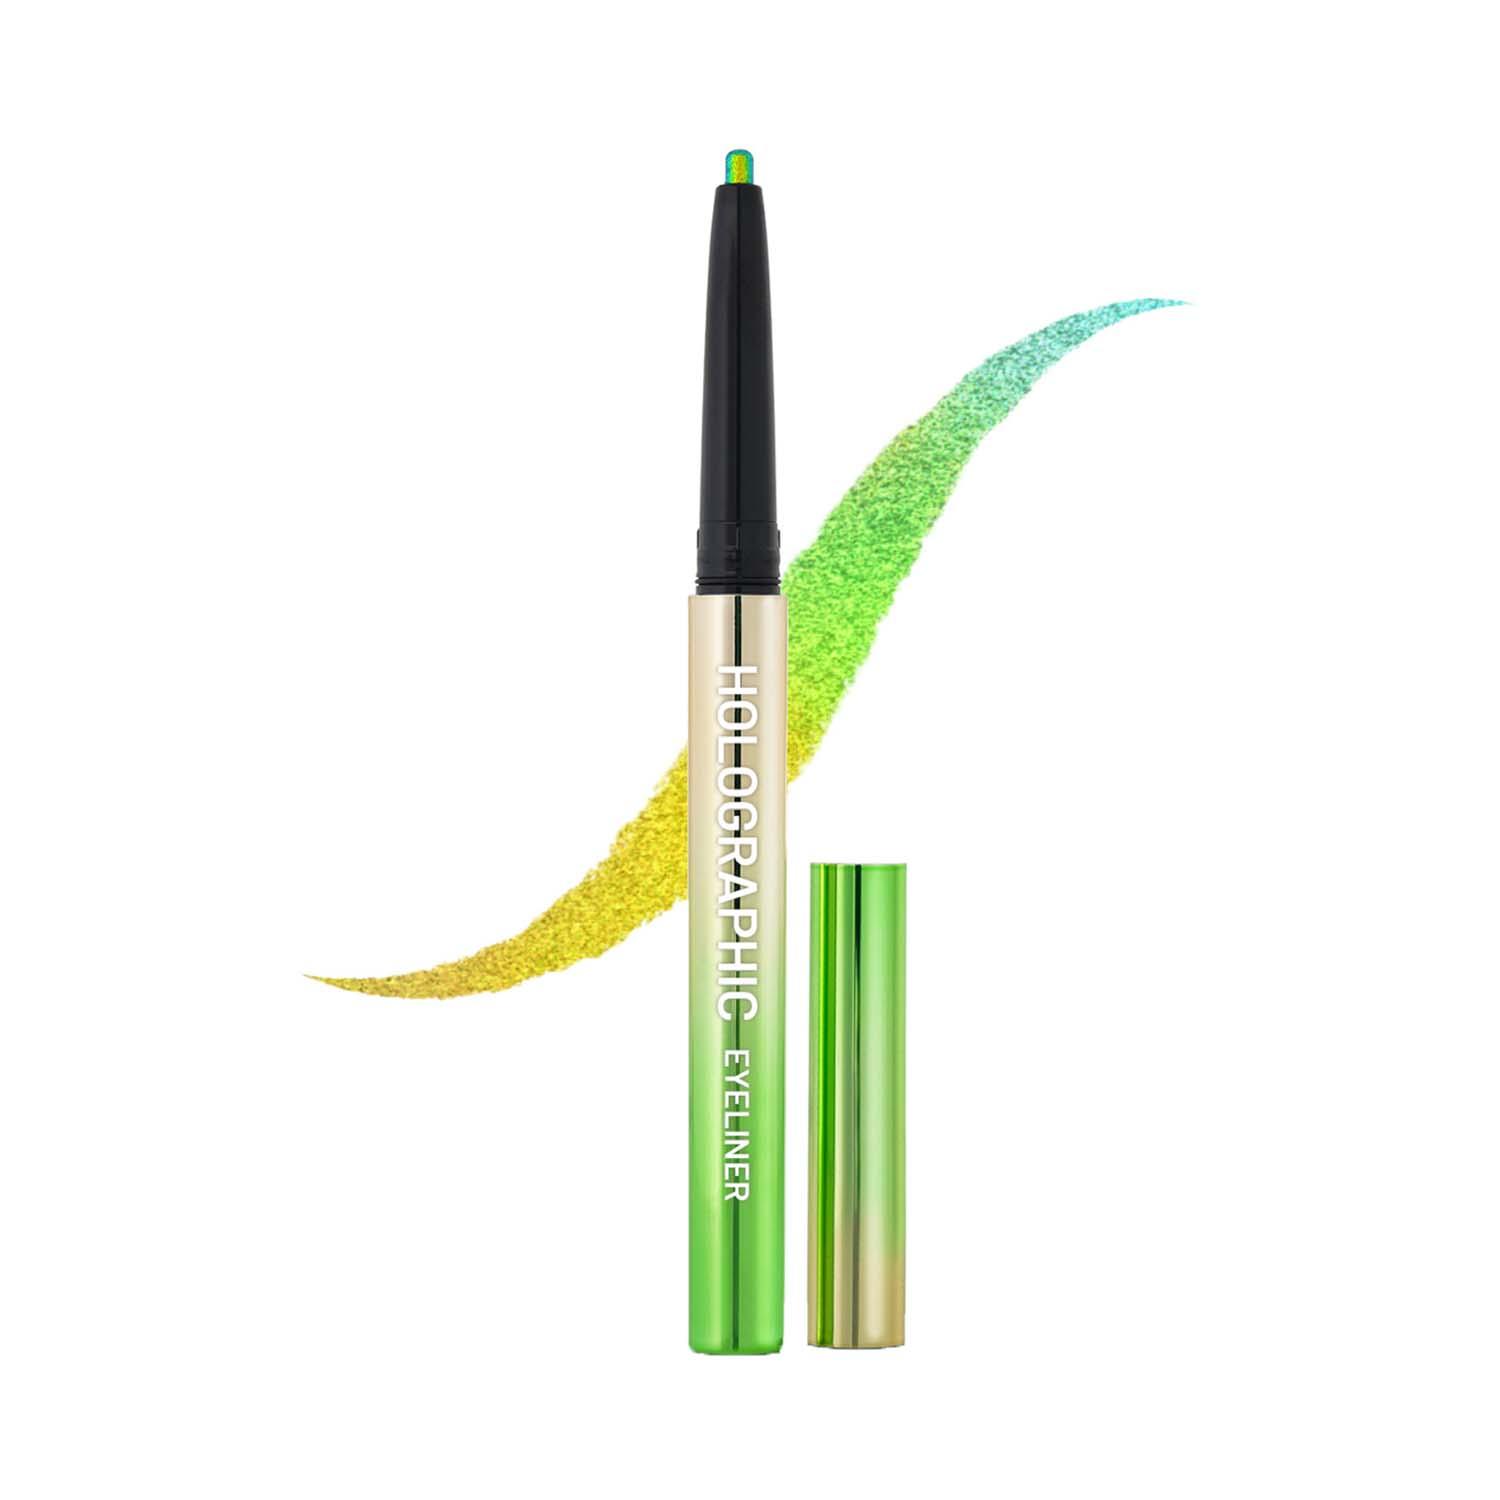 Swiss Beauty Holographic Eyeliner - 02 Nouthern Light (0.2 g)